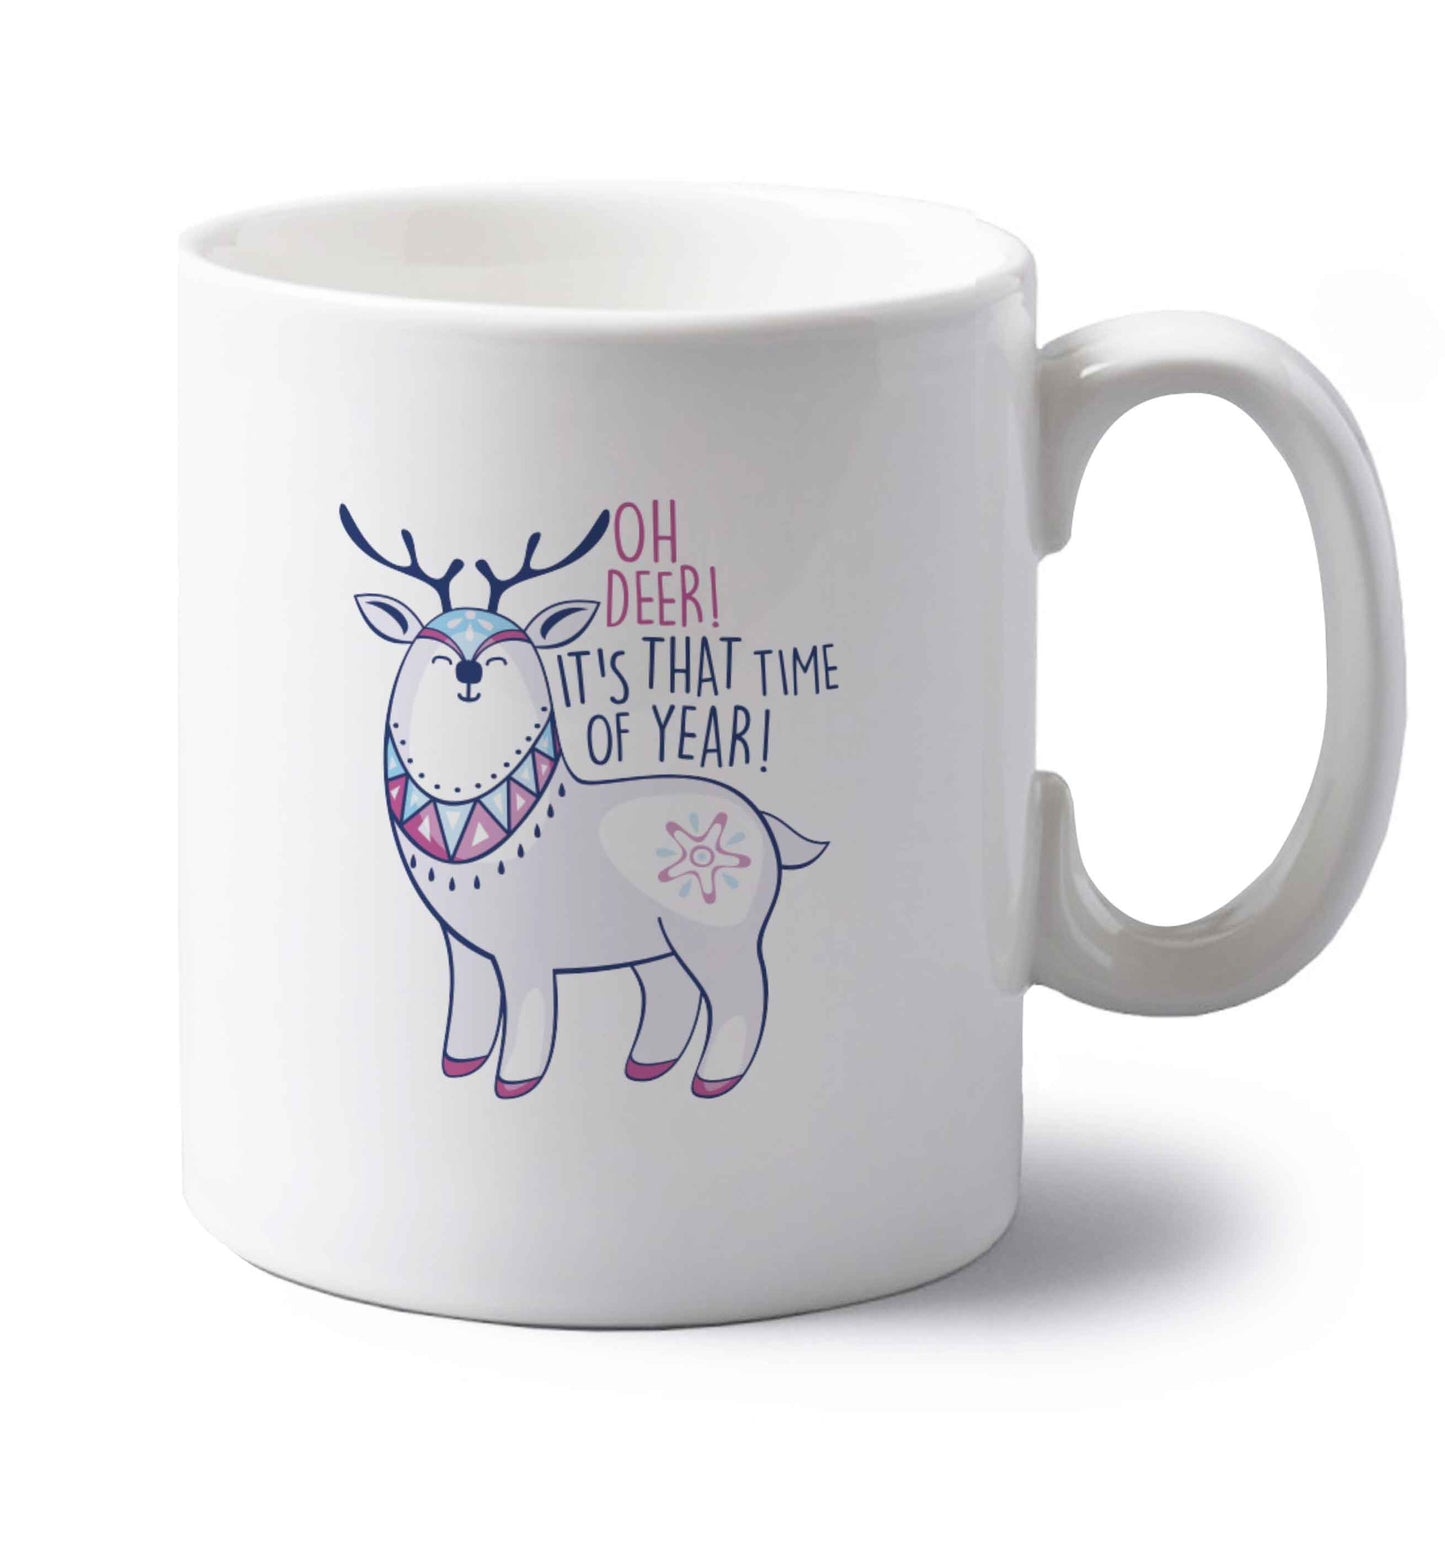 Oh dear it's that time of year left handed white ceramic mug 